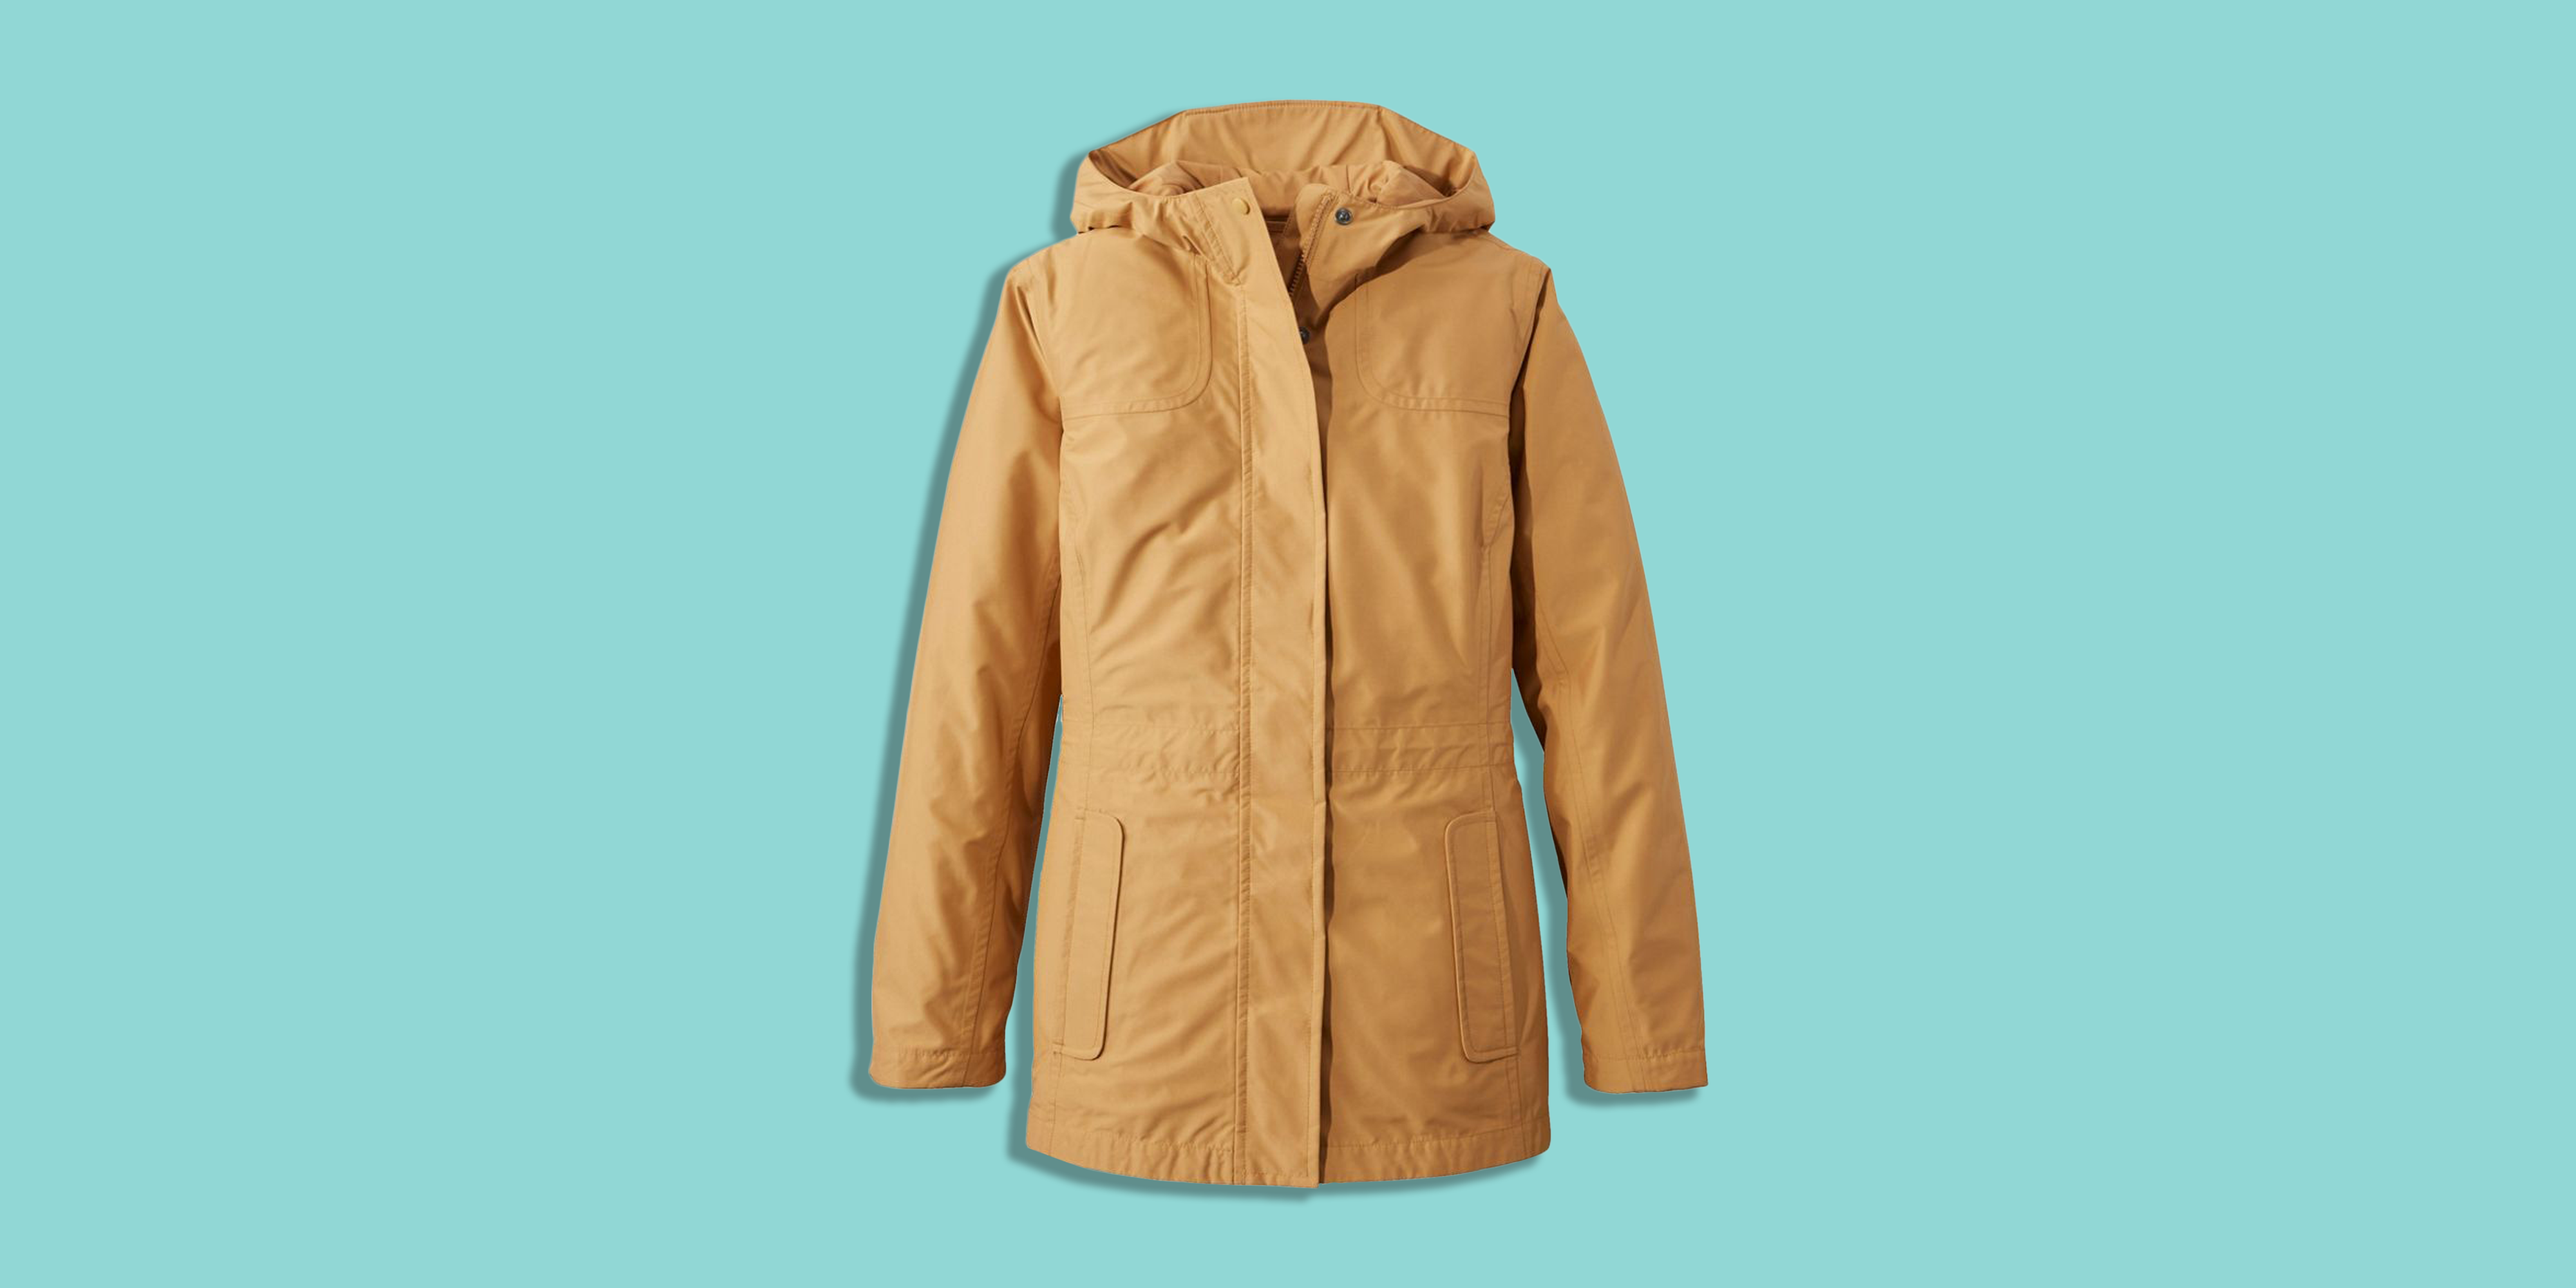 The 20 best women's rain jackets and raincoats of 2023